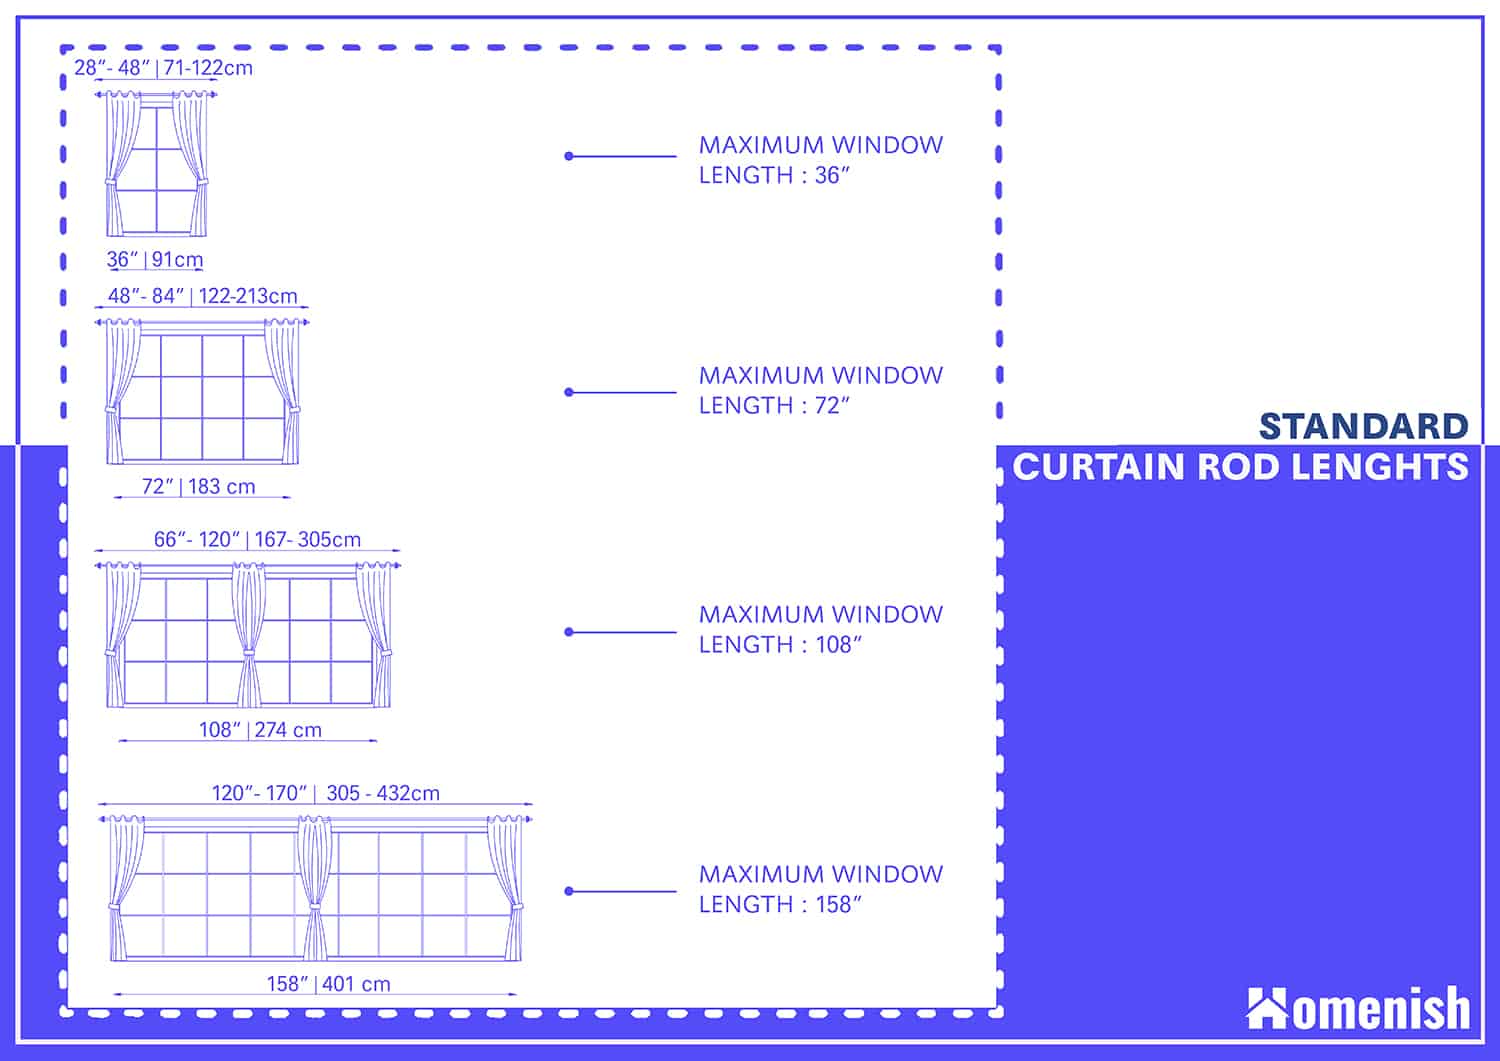 Curtain Rod Lengths Explained Diagram, How Wide Should My Curtain Rod Be